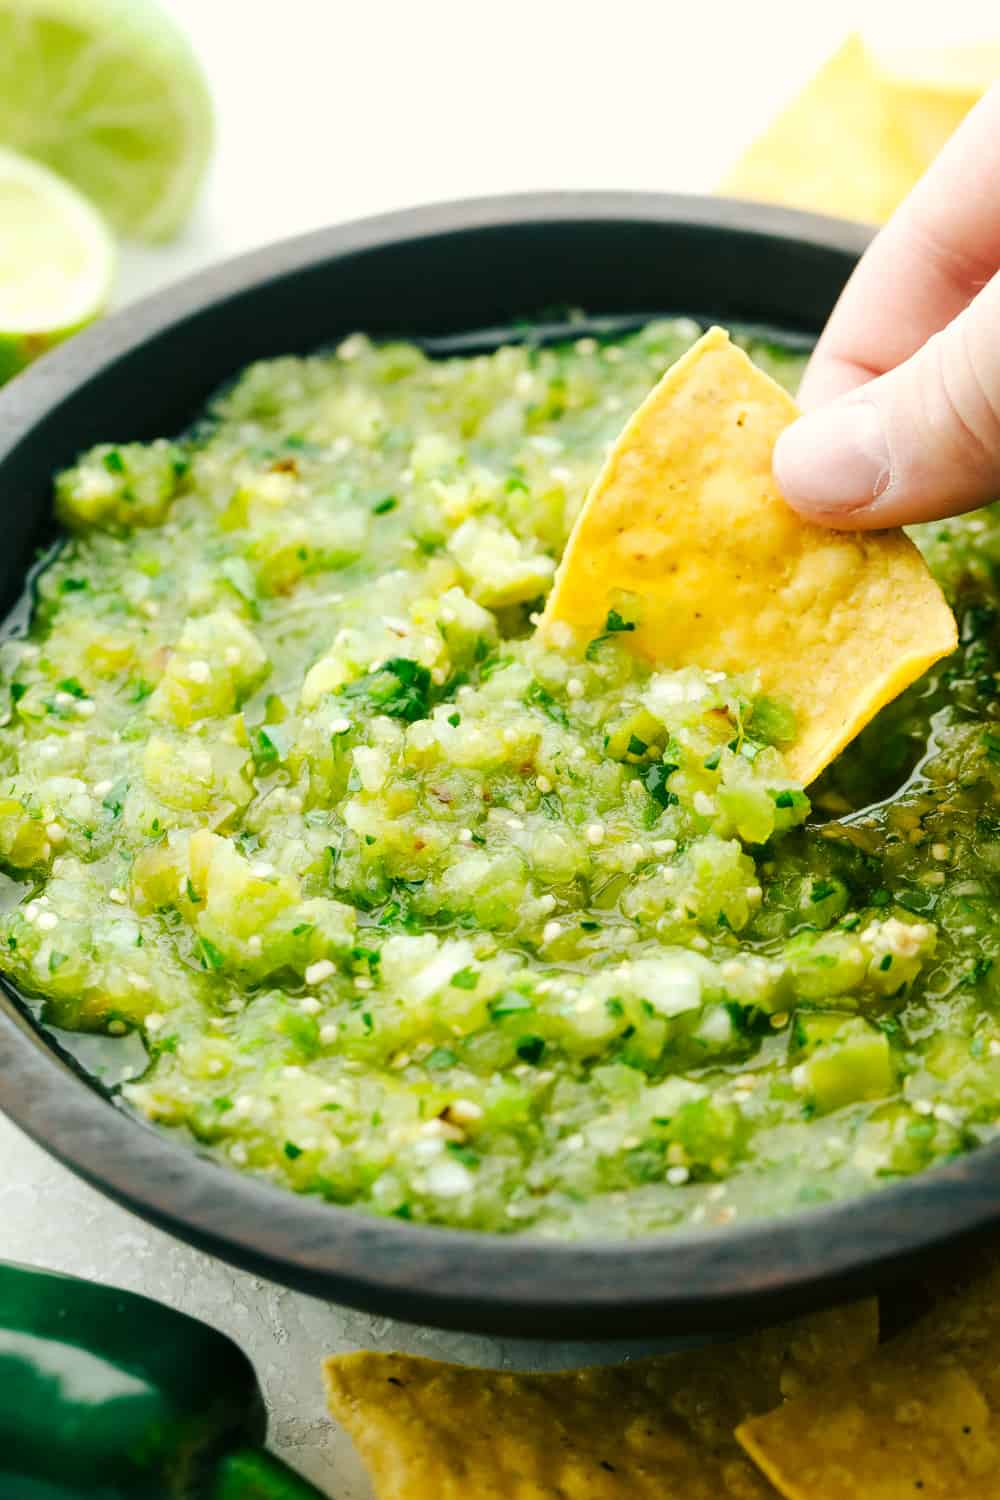 Dipping a chip in homemade salsa verde.